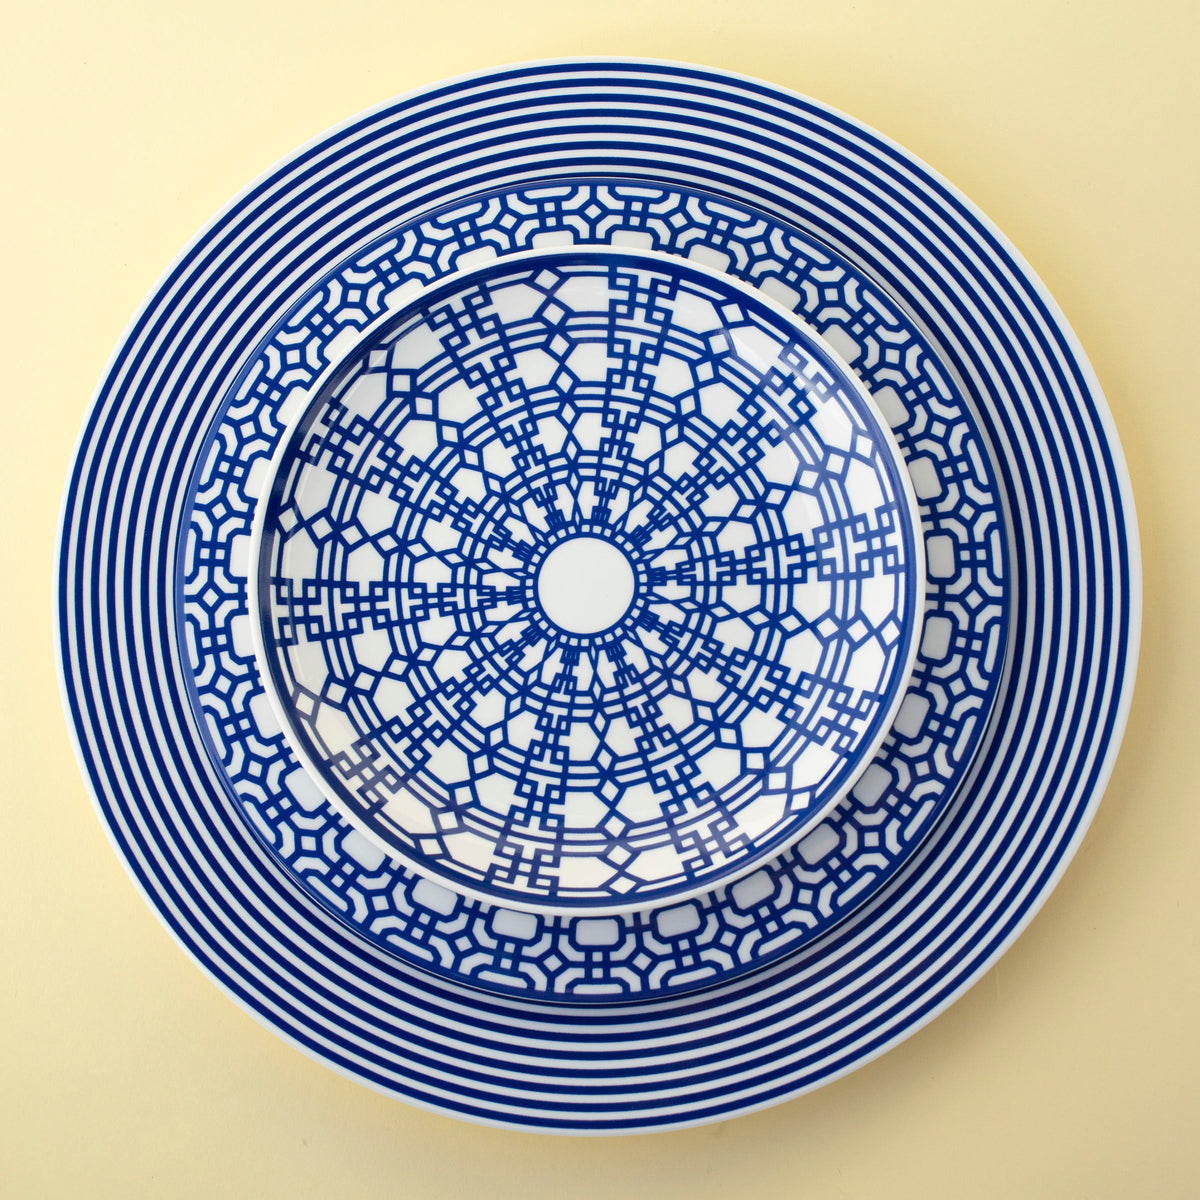 A blue and white Caskata Artisanal Home Newport Garden Gate Salad Plate with a design on it.